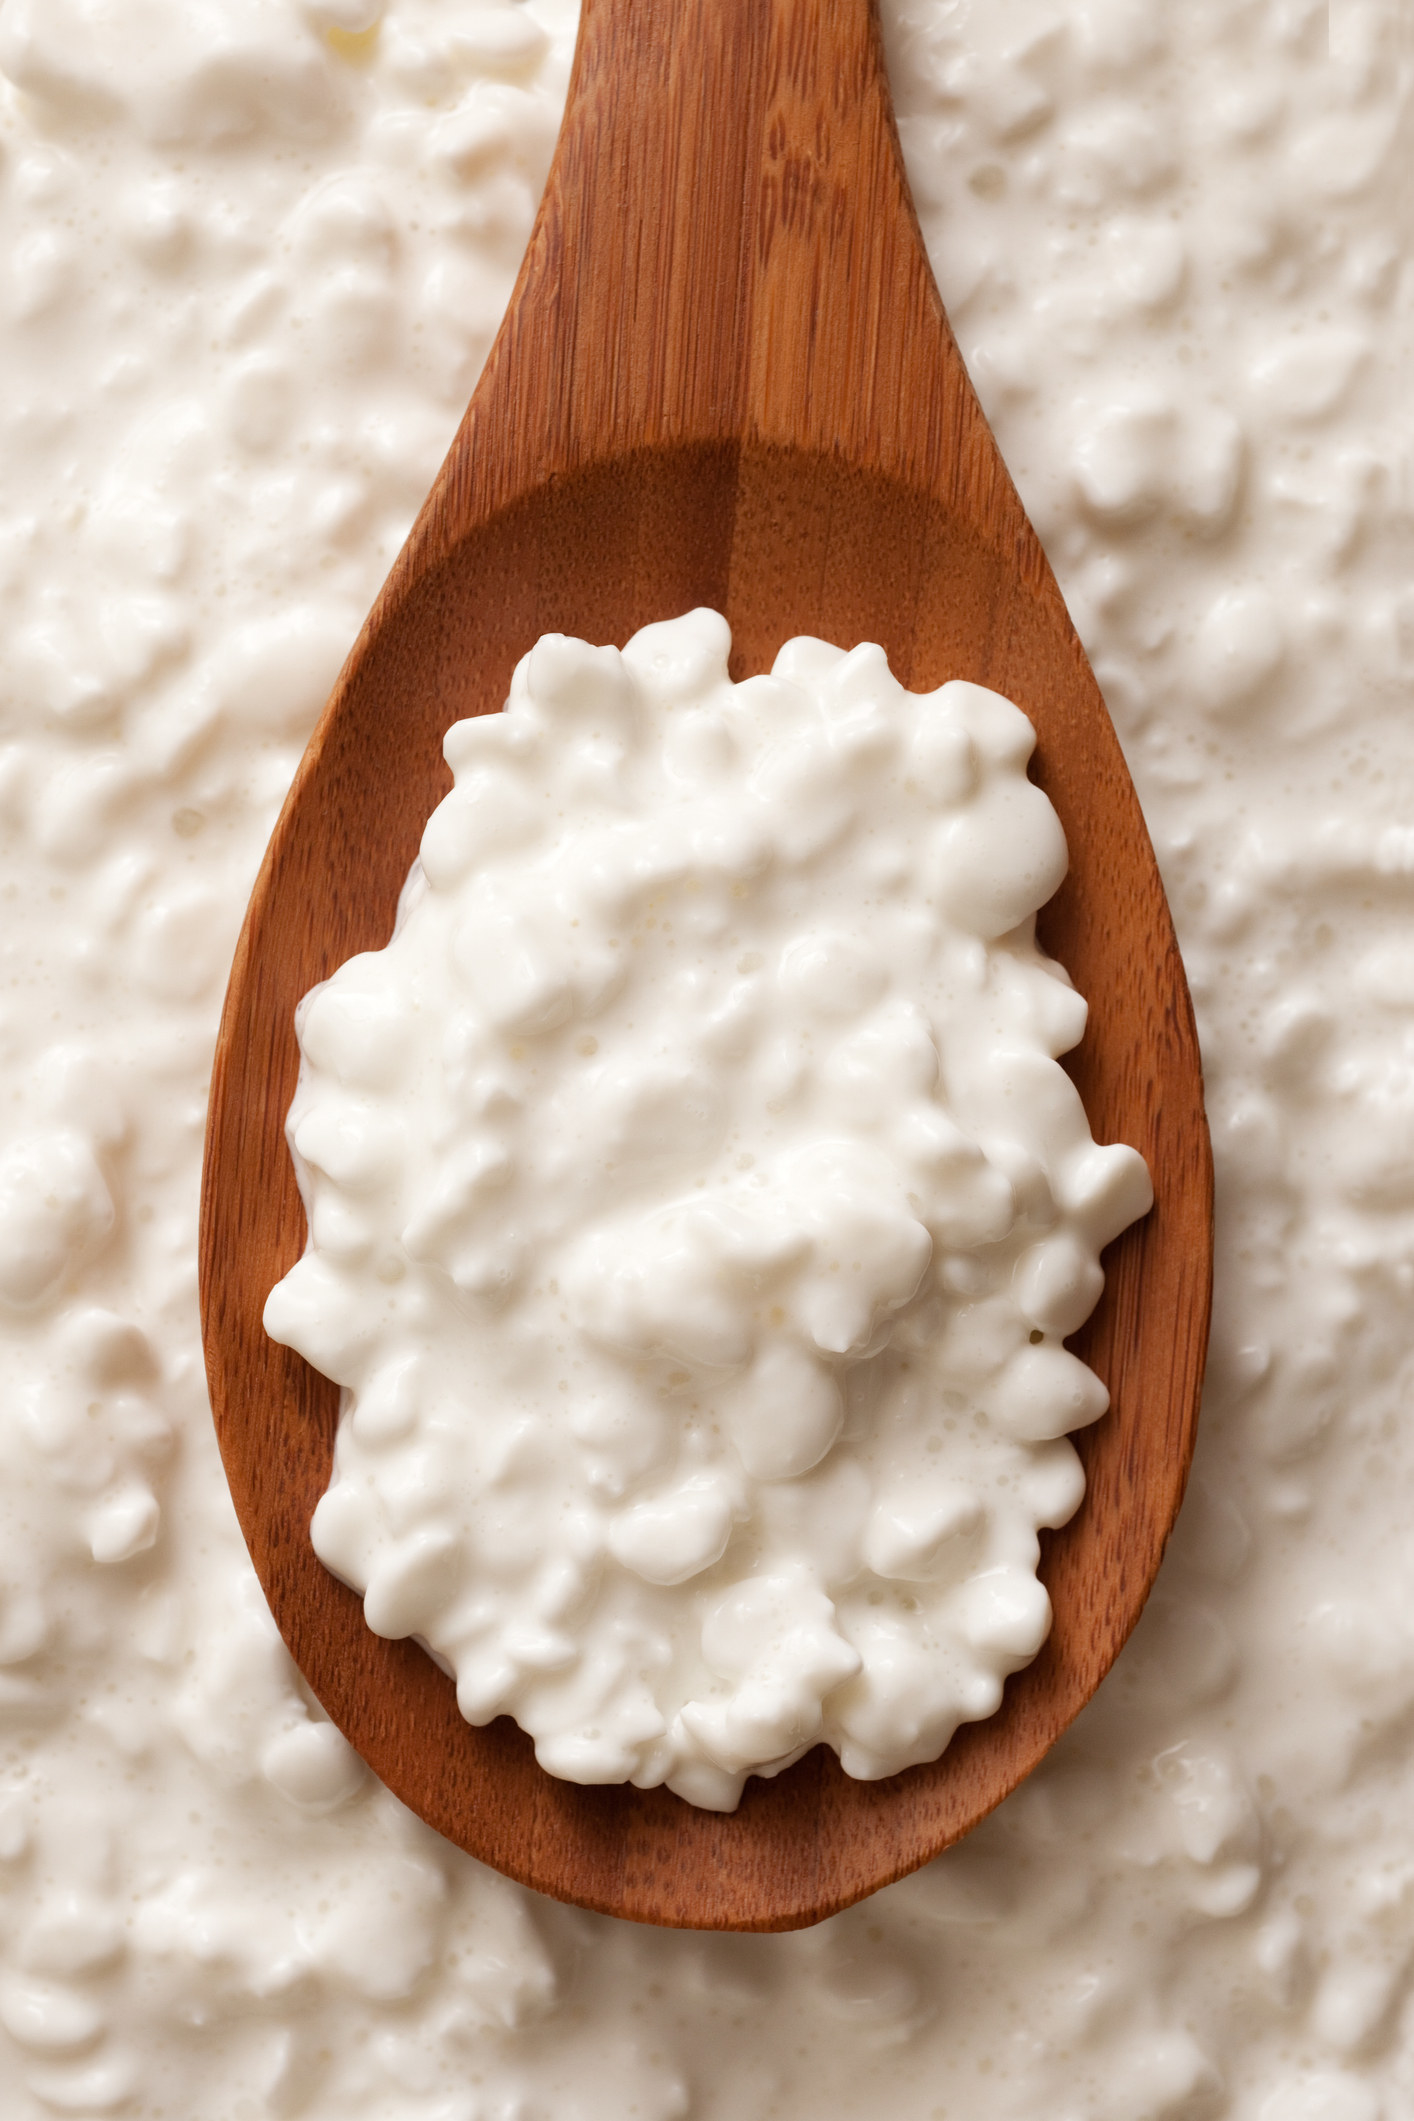 A spoonful of cottage cheese.